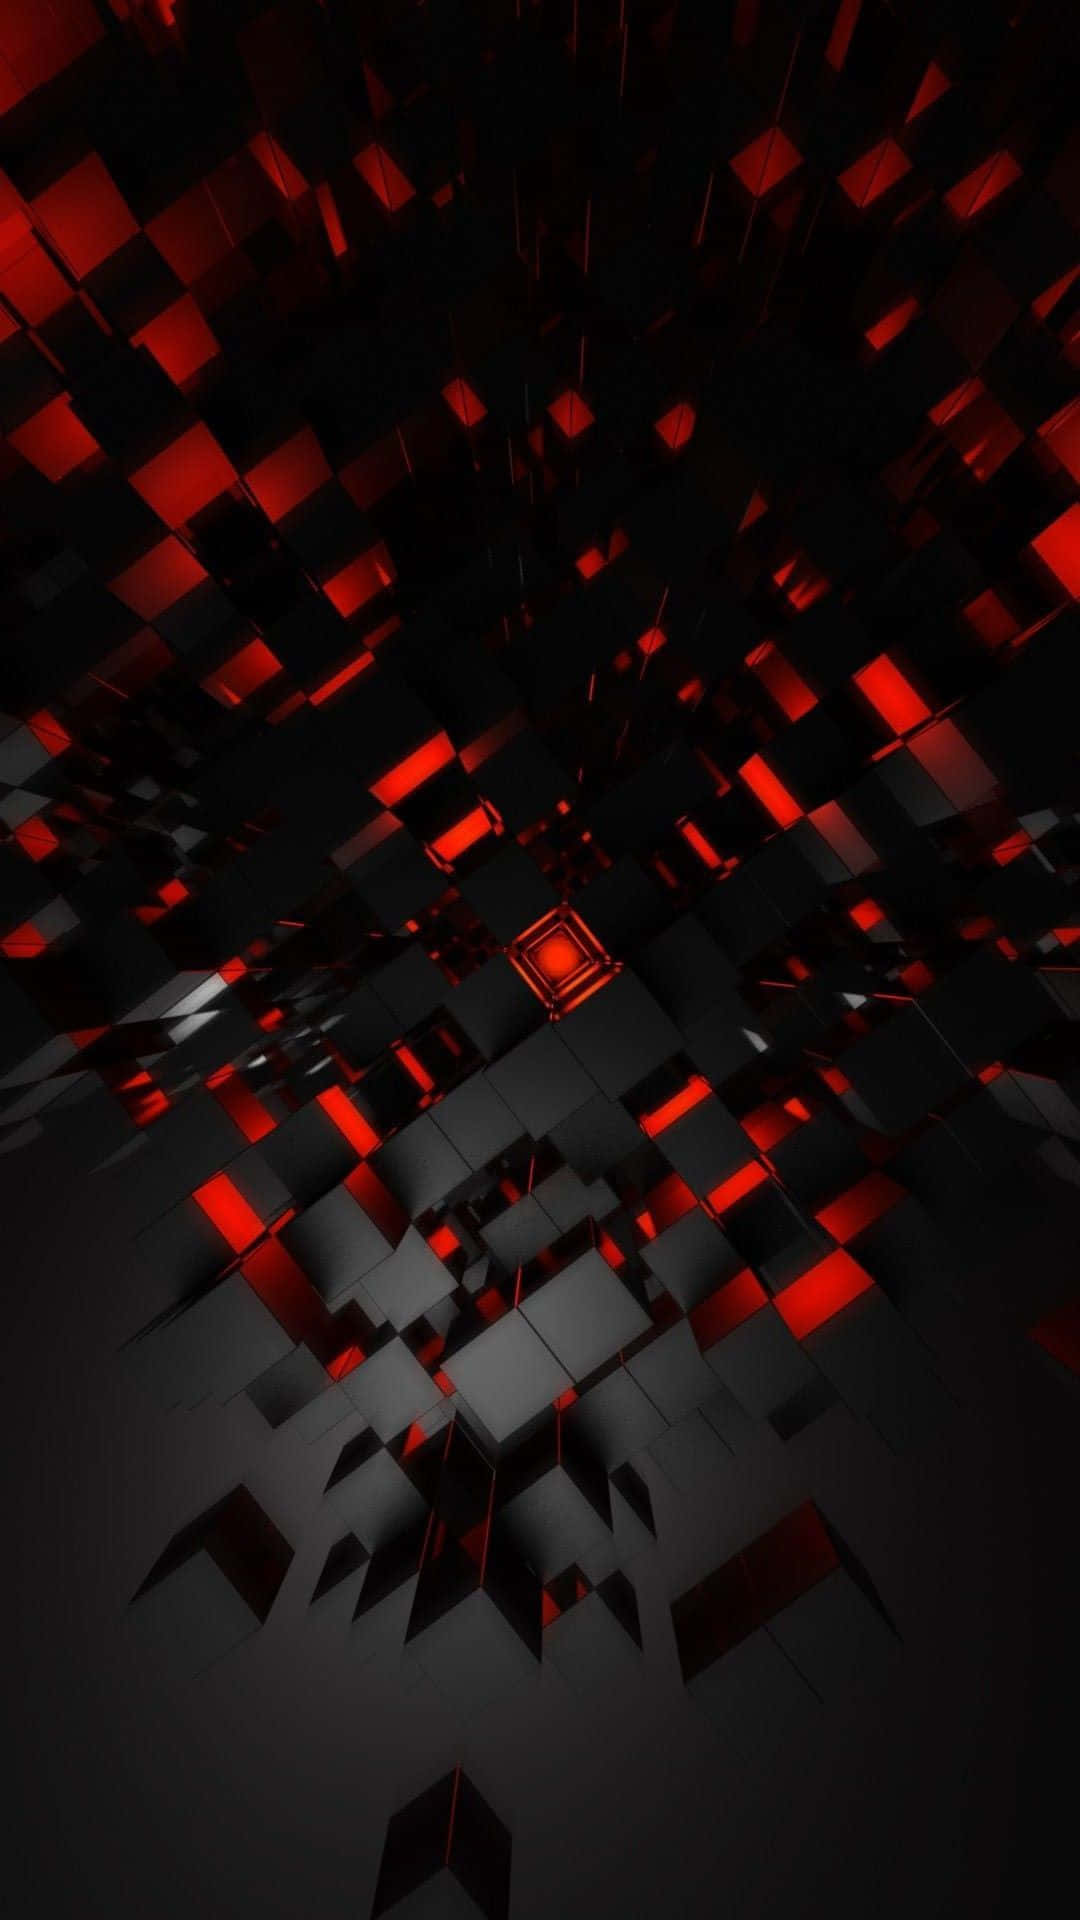 Red And Black Abstract Background With Cubes Wallpaper